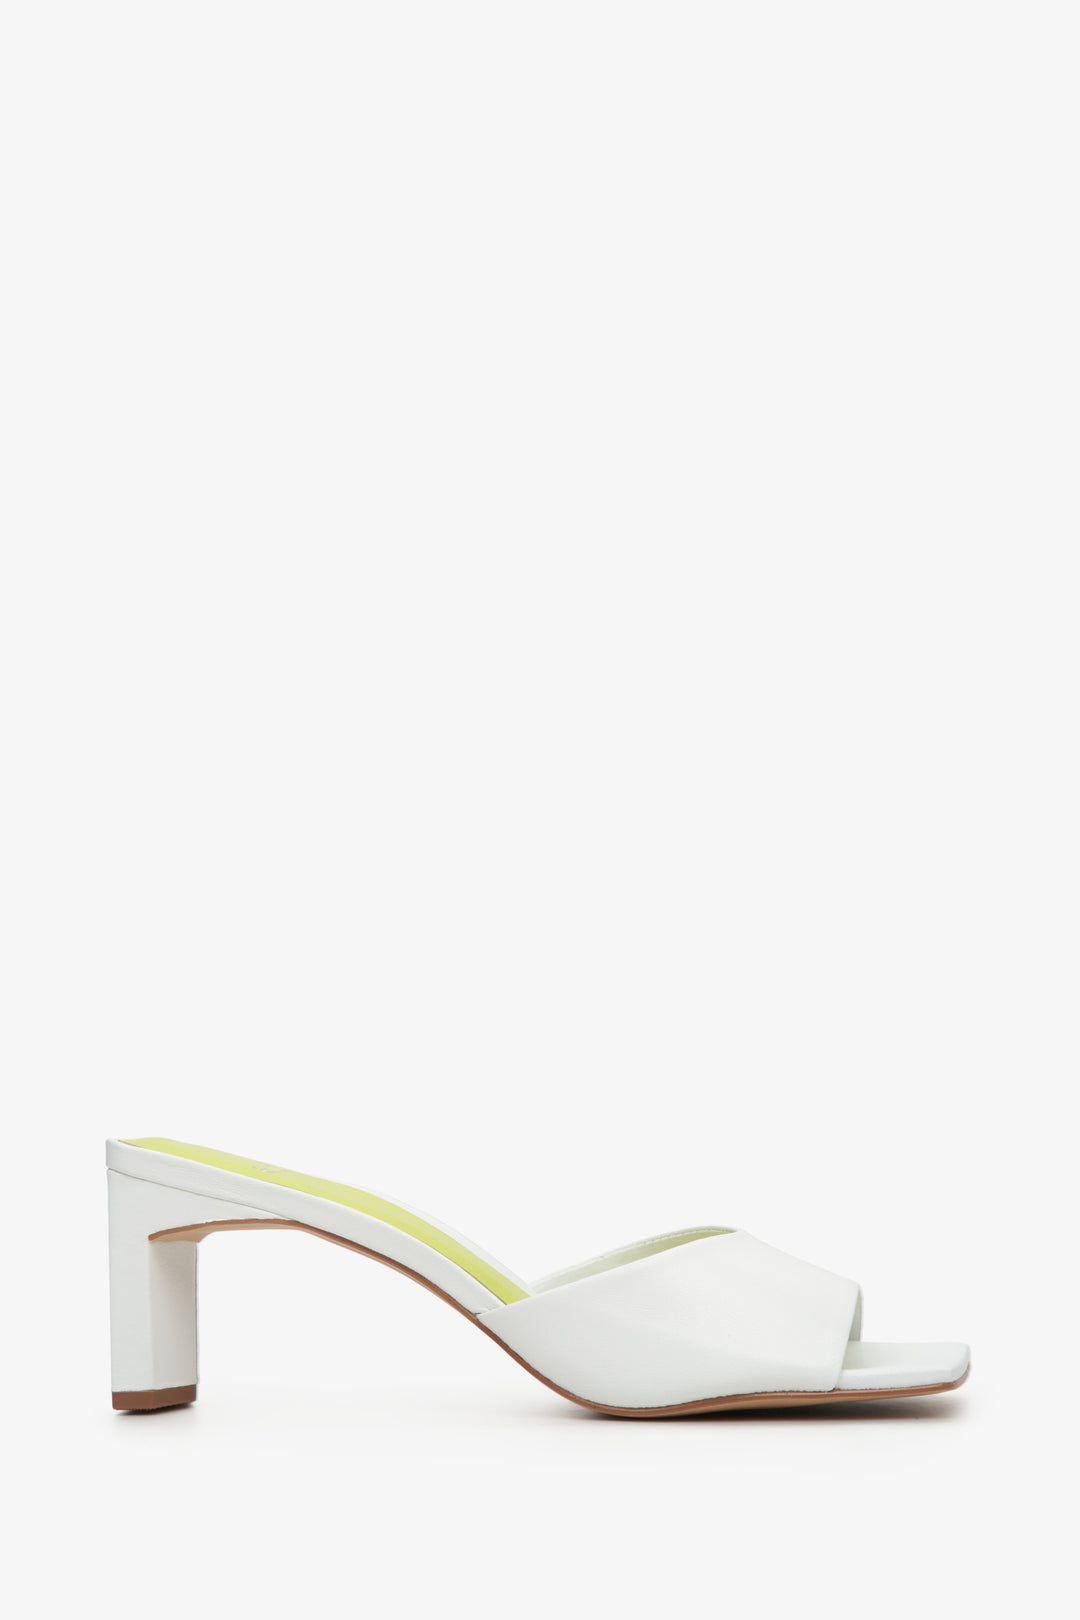 Women's White Leather Mules with a Block Heel Estro ER00112396.